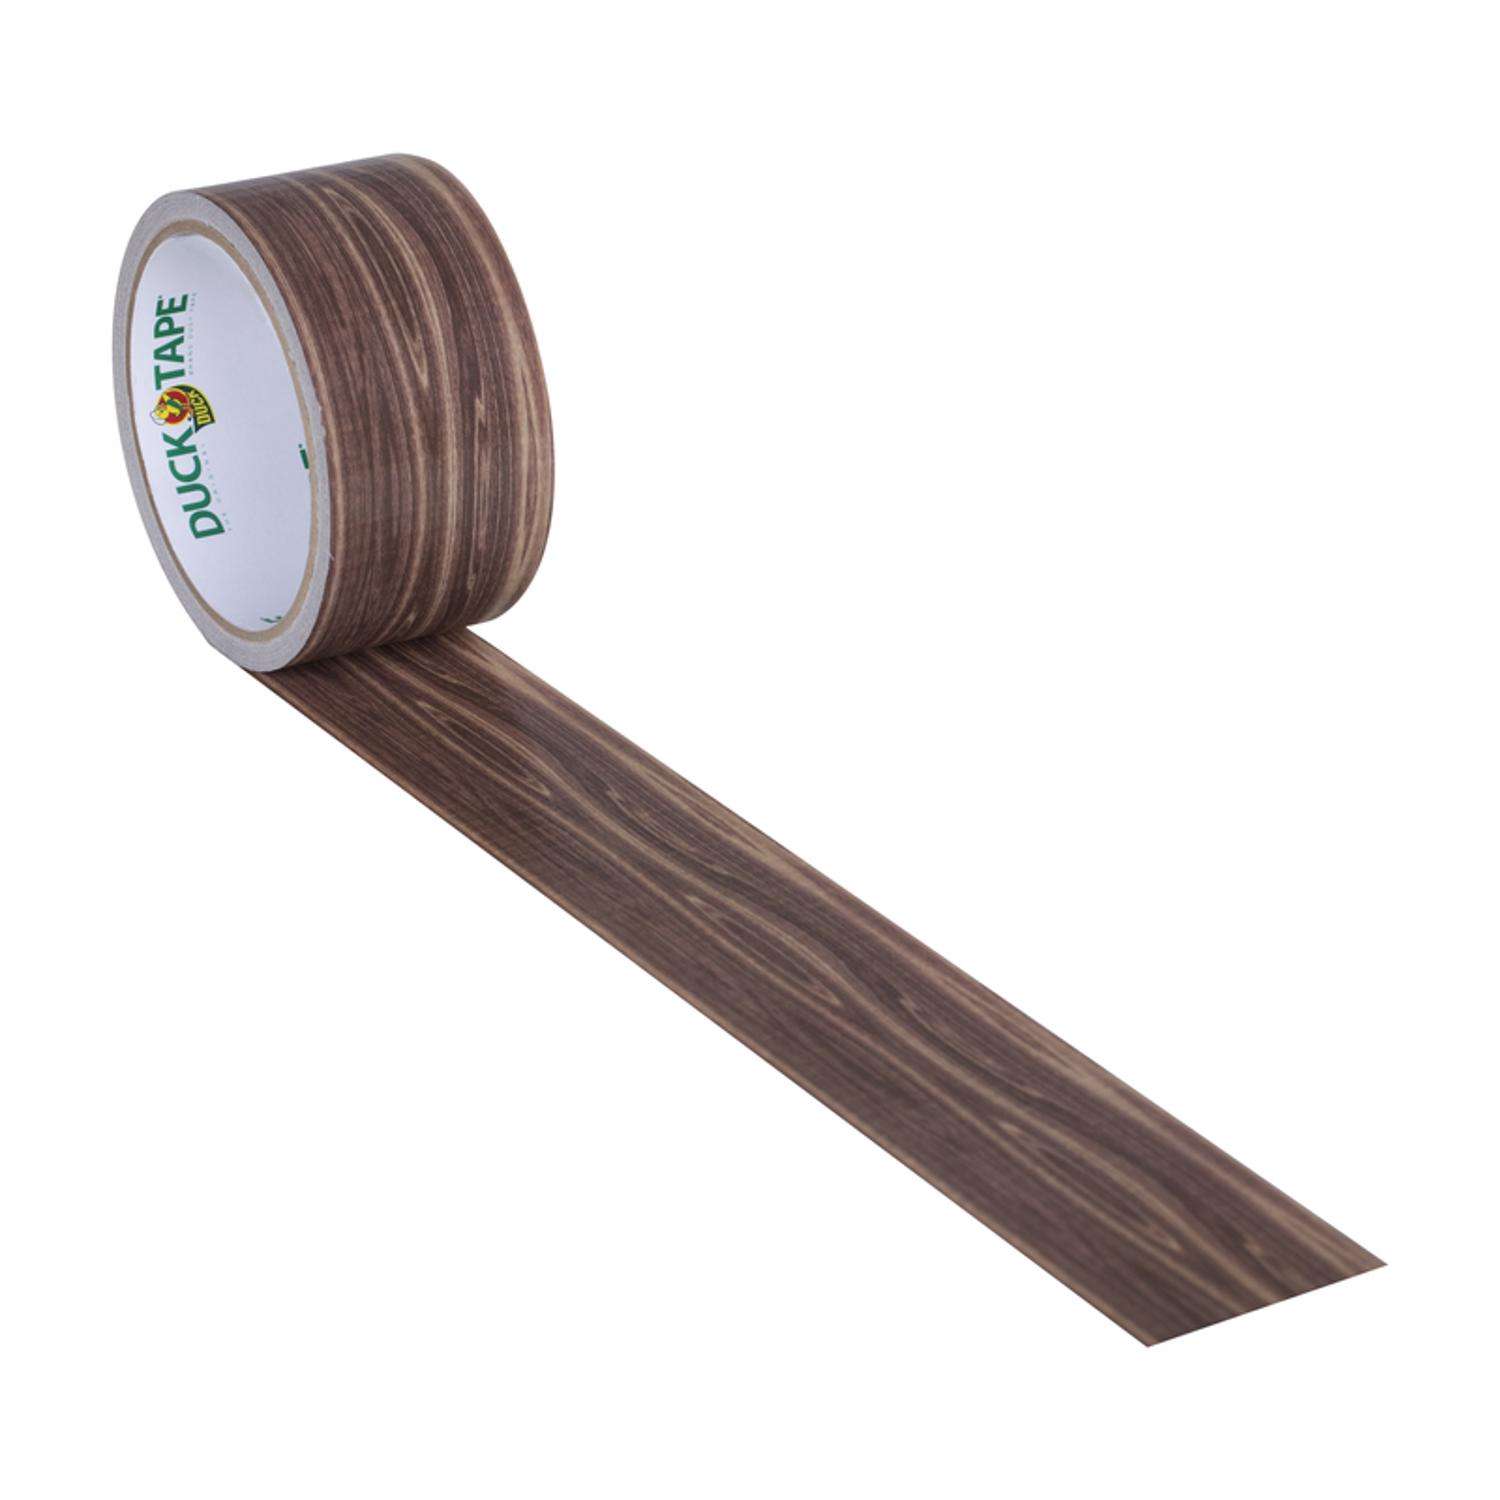 FRCOLOR 3 Rolls Colored Duct Tape Water Activated Tape Shipping Packaging  Tape Moving Packaging Tape Sealing Adhesive Tape Brown Kraft Plumbing Tape